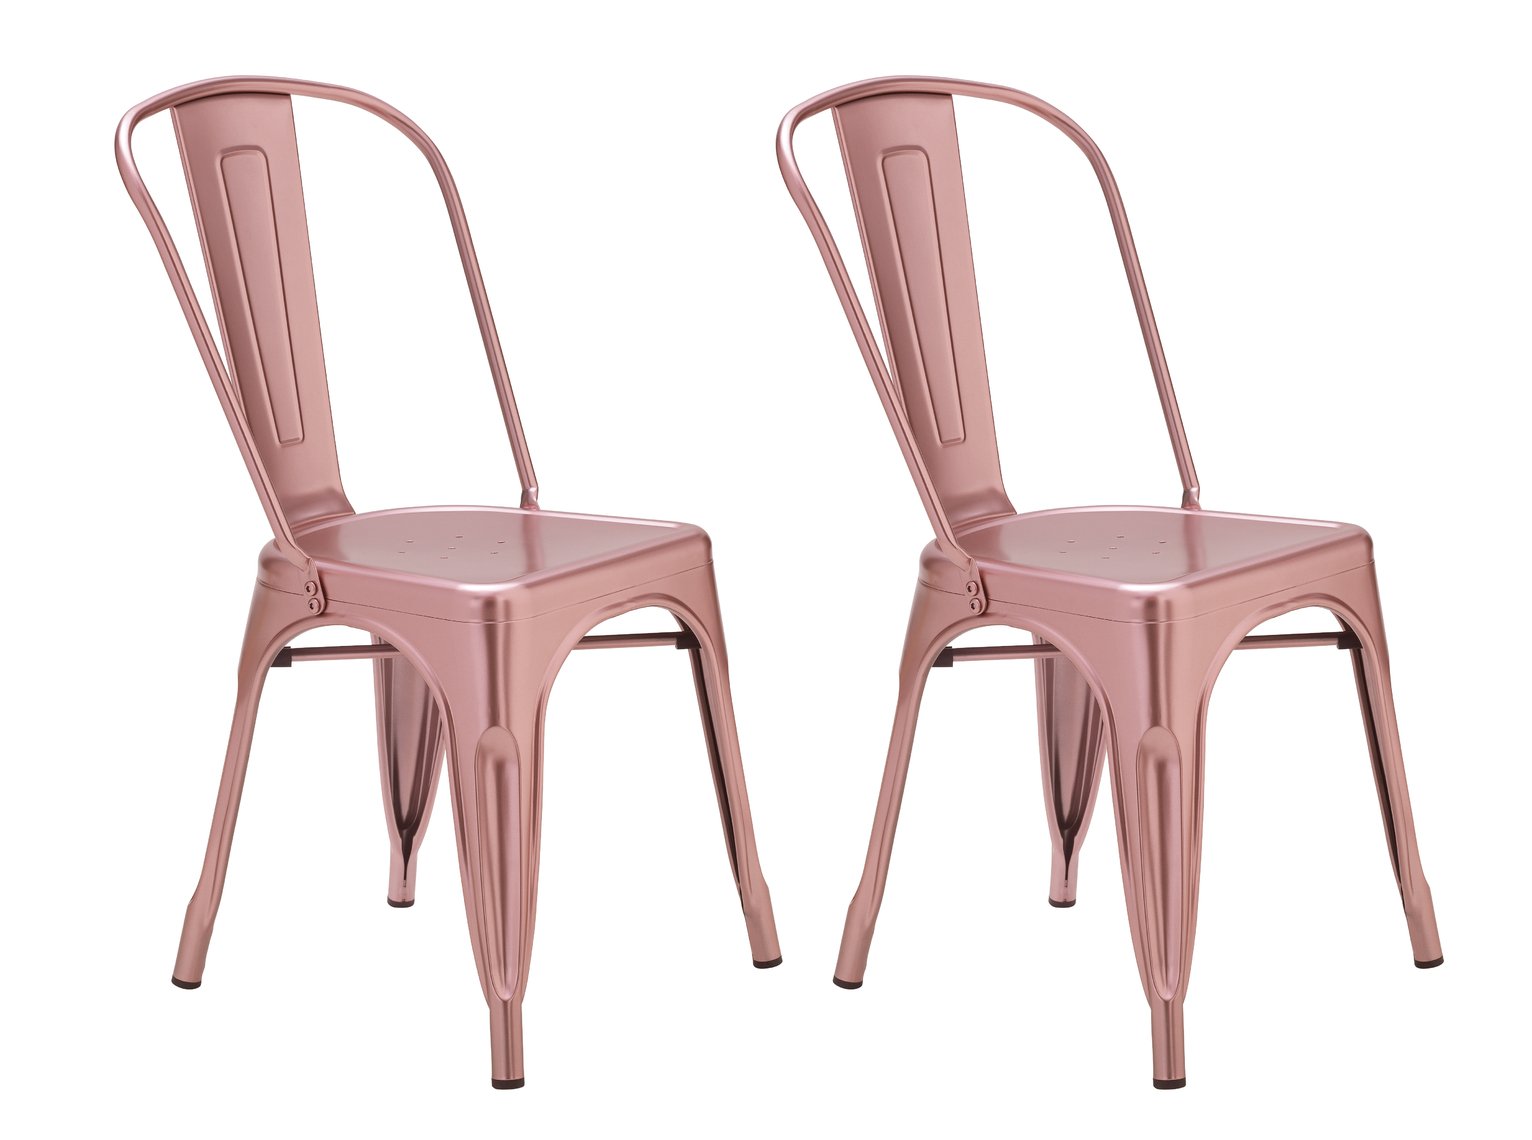 Argos Home Industrial Pair of Metal Dining Chairs - Pink